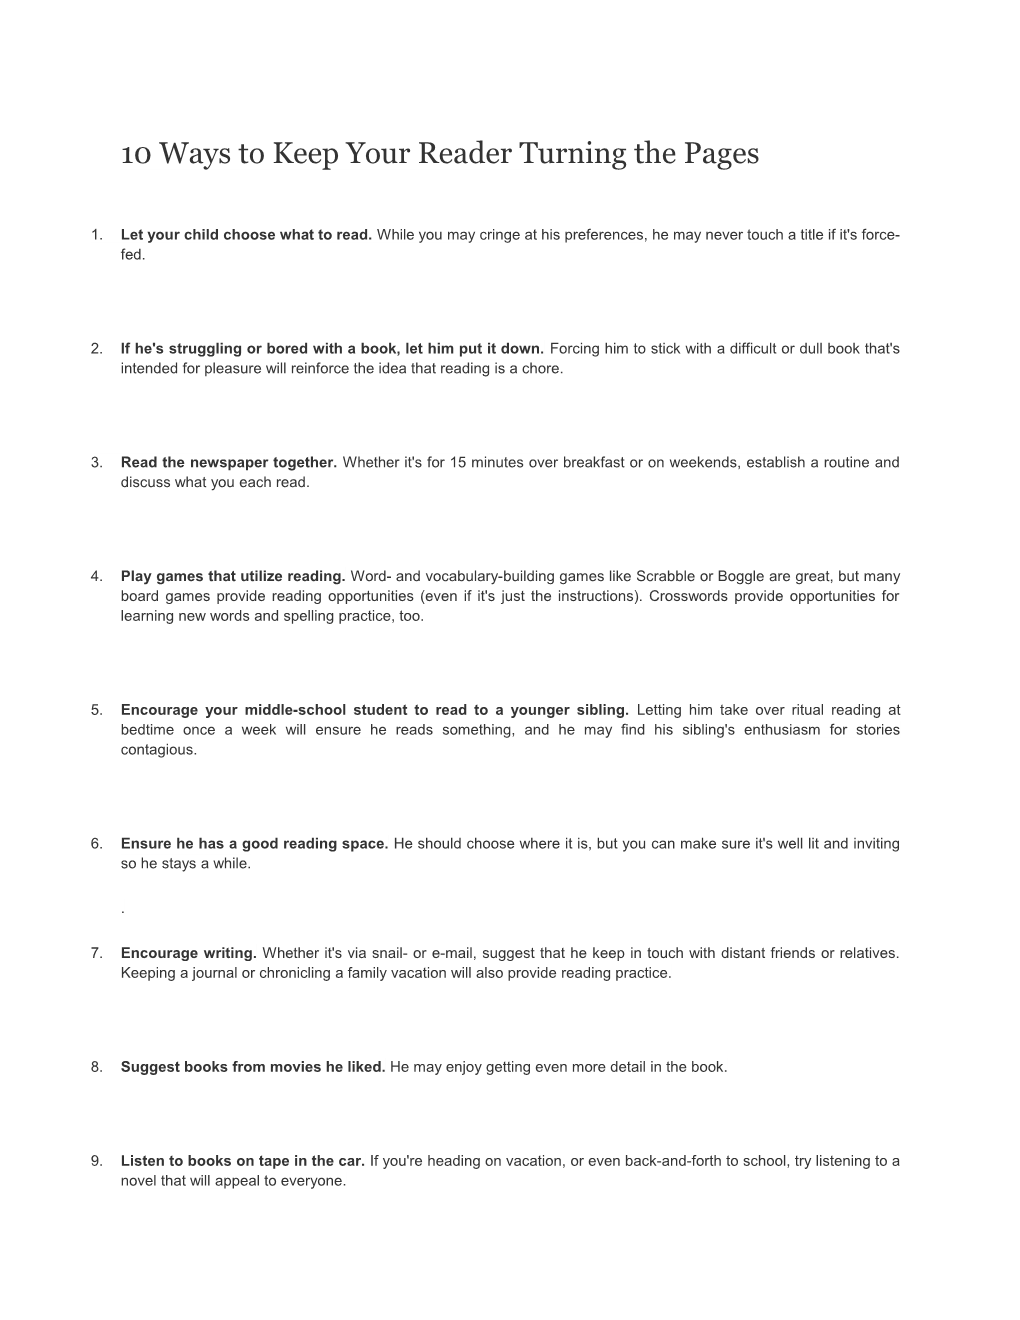 10 Ways to Keep Your Reader Turning the Pages